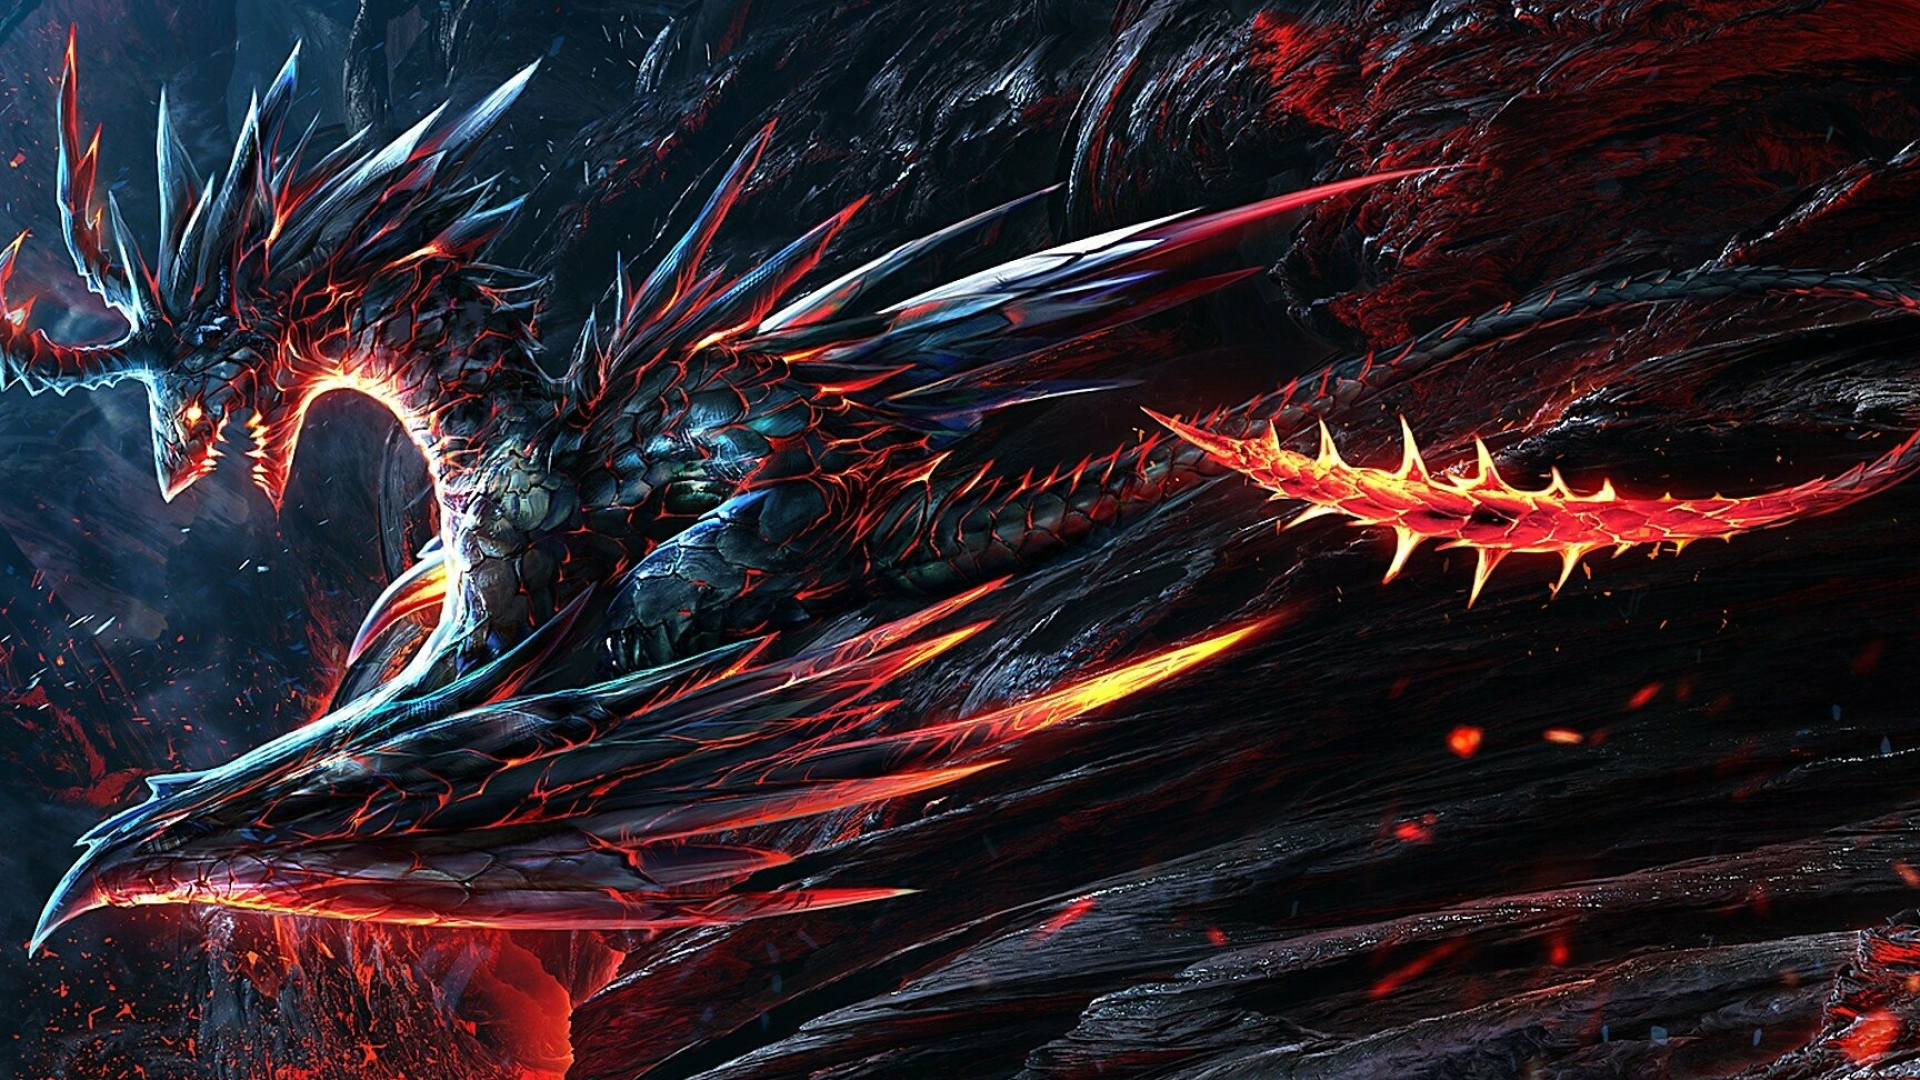 Dragon: Serpent, depicted as having four legs, wings, talons, and fangs and can breathe fire. 1920x1080 Full HD Wallpaper.